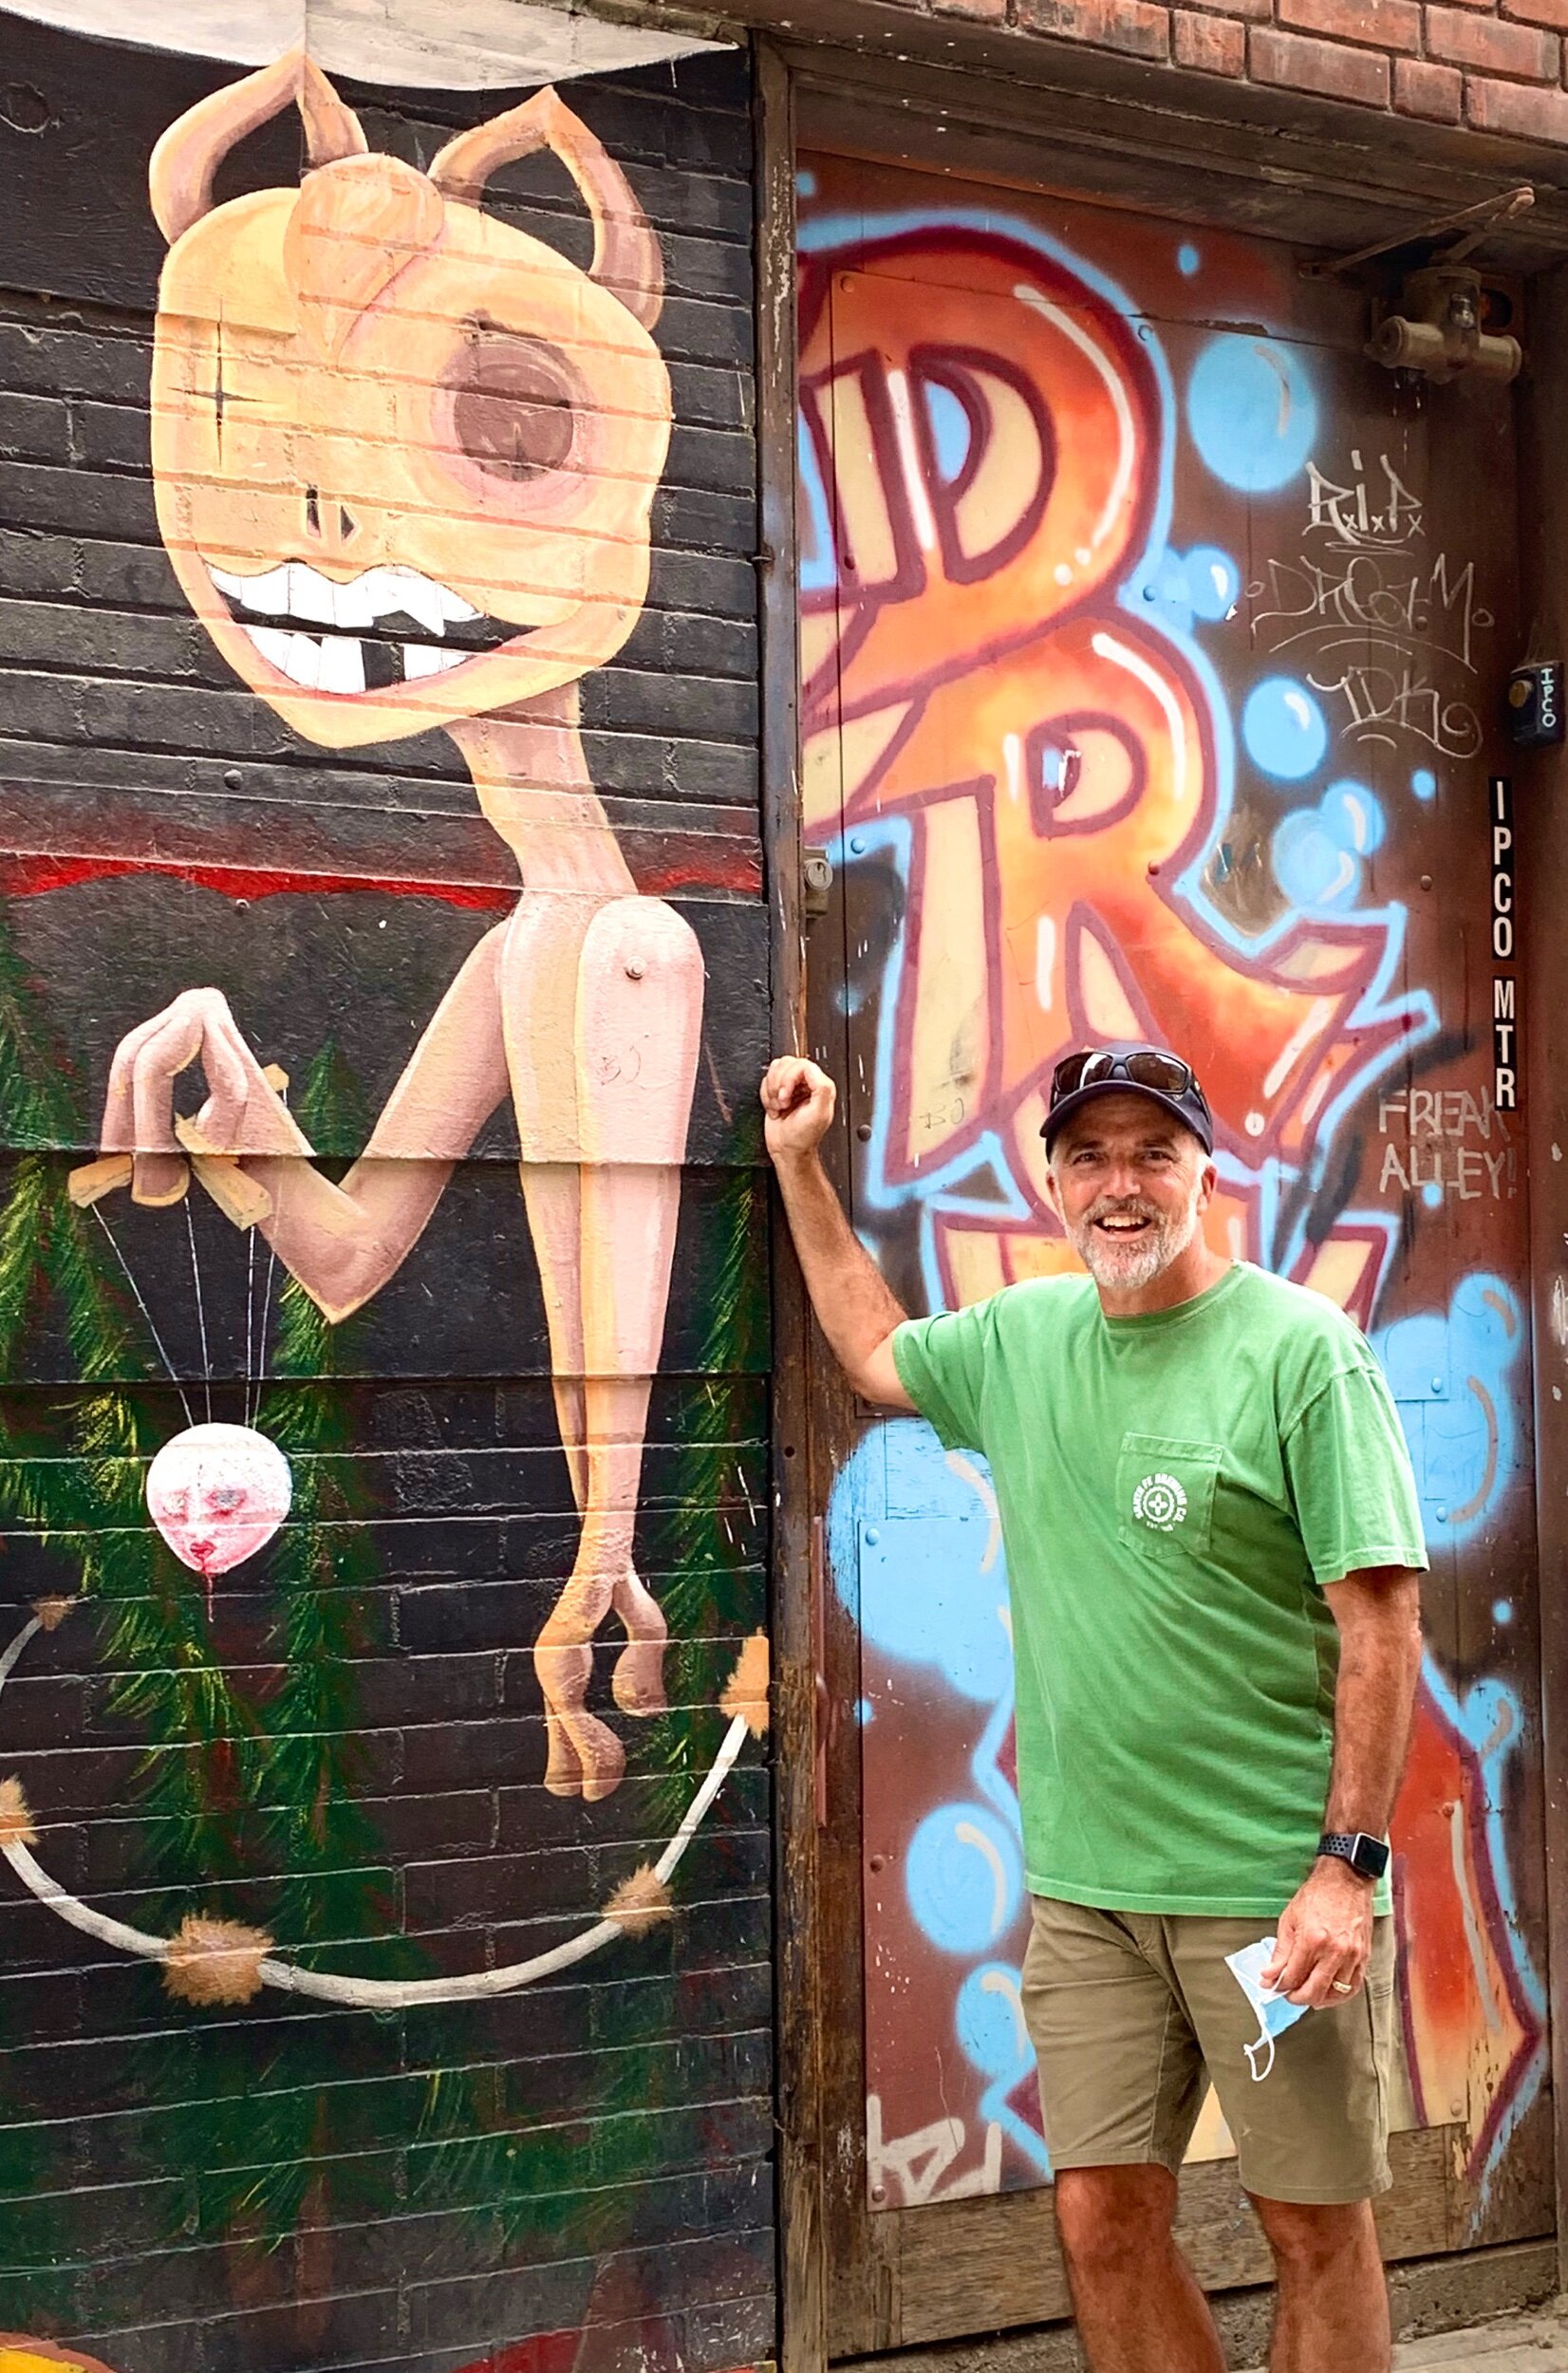  So many murals to choose from for almost a block—and Craig picks this one for his photo. 😄 